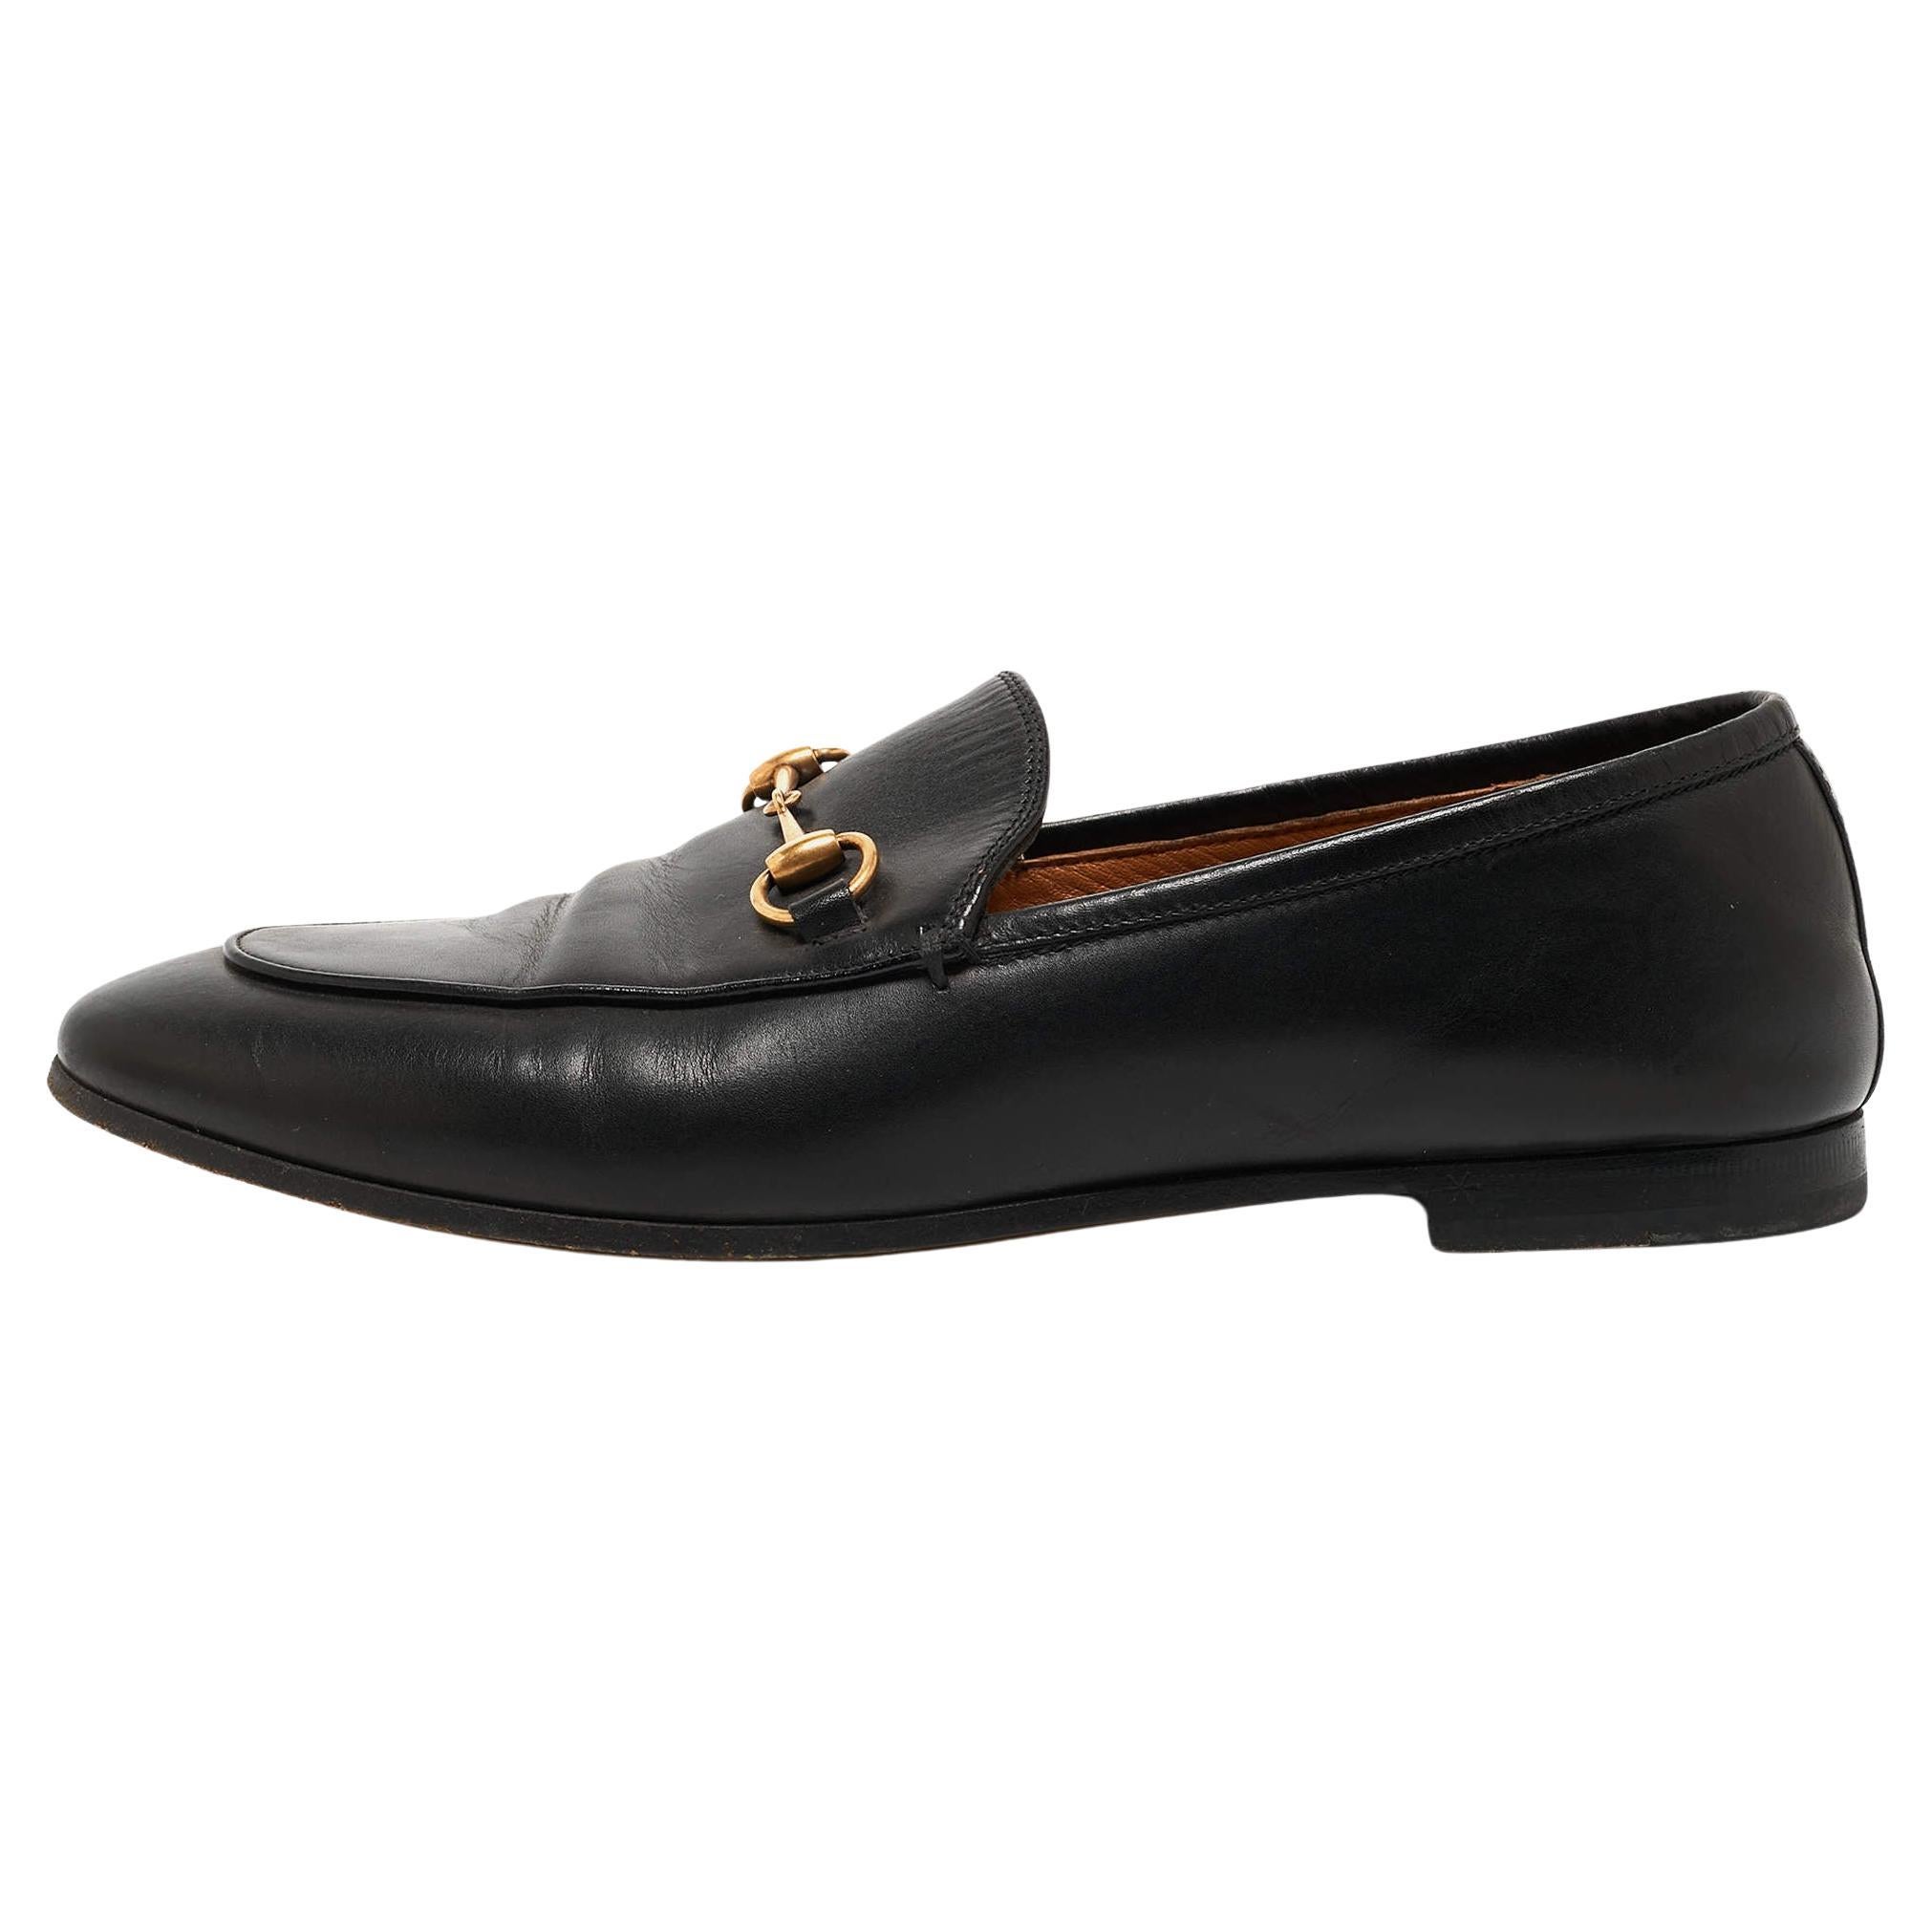 Gucci Black Leather Jordaan Loafers Size 38.5